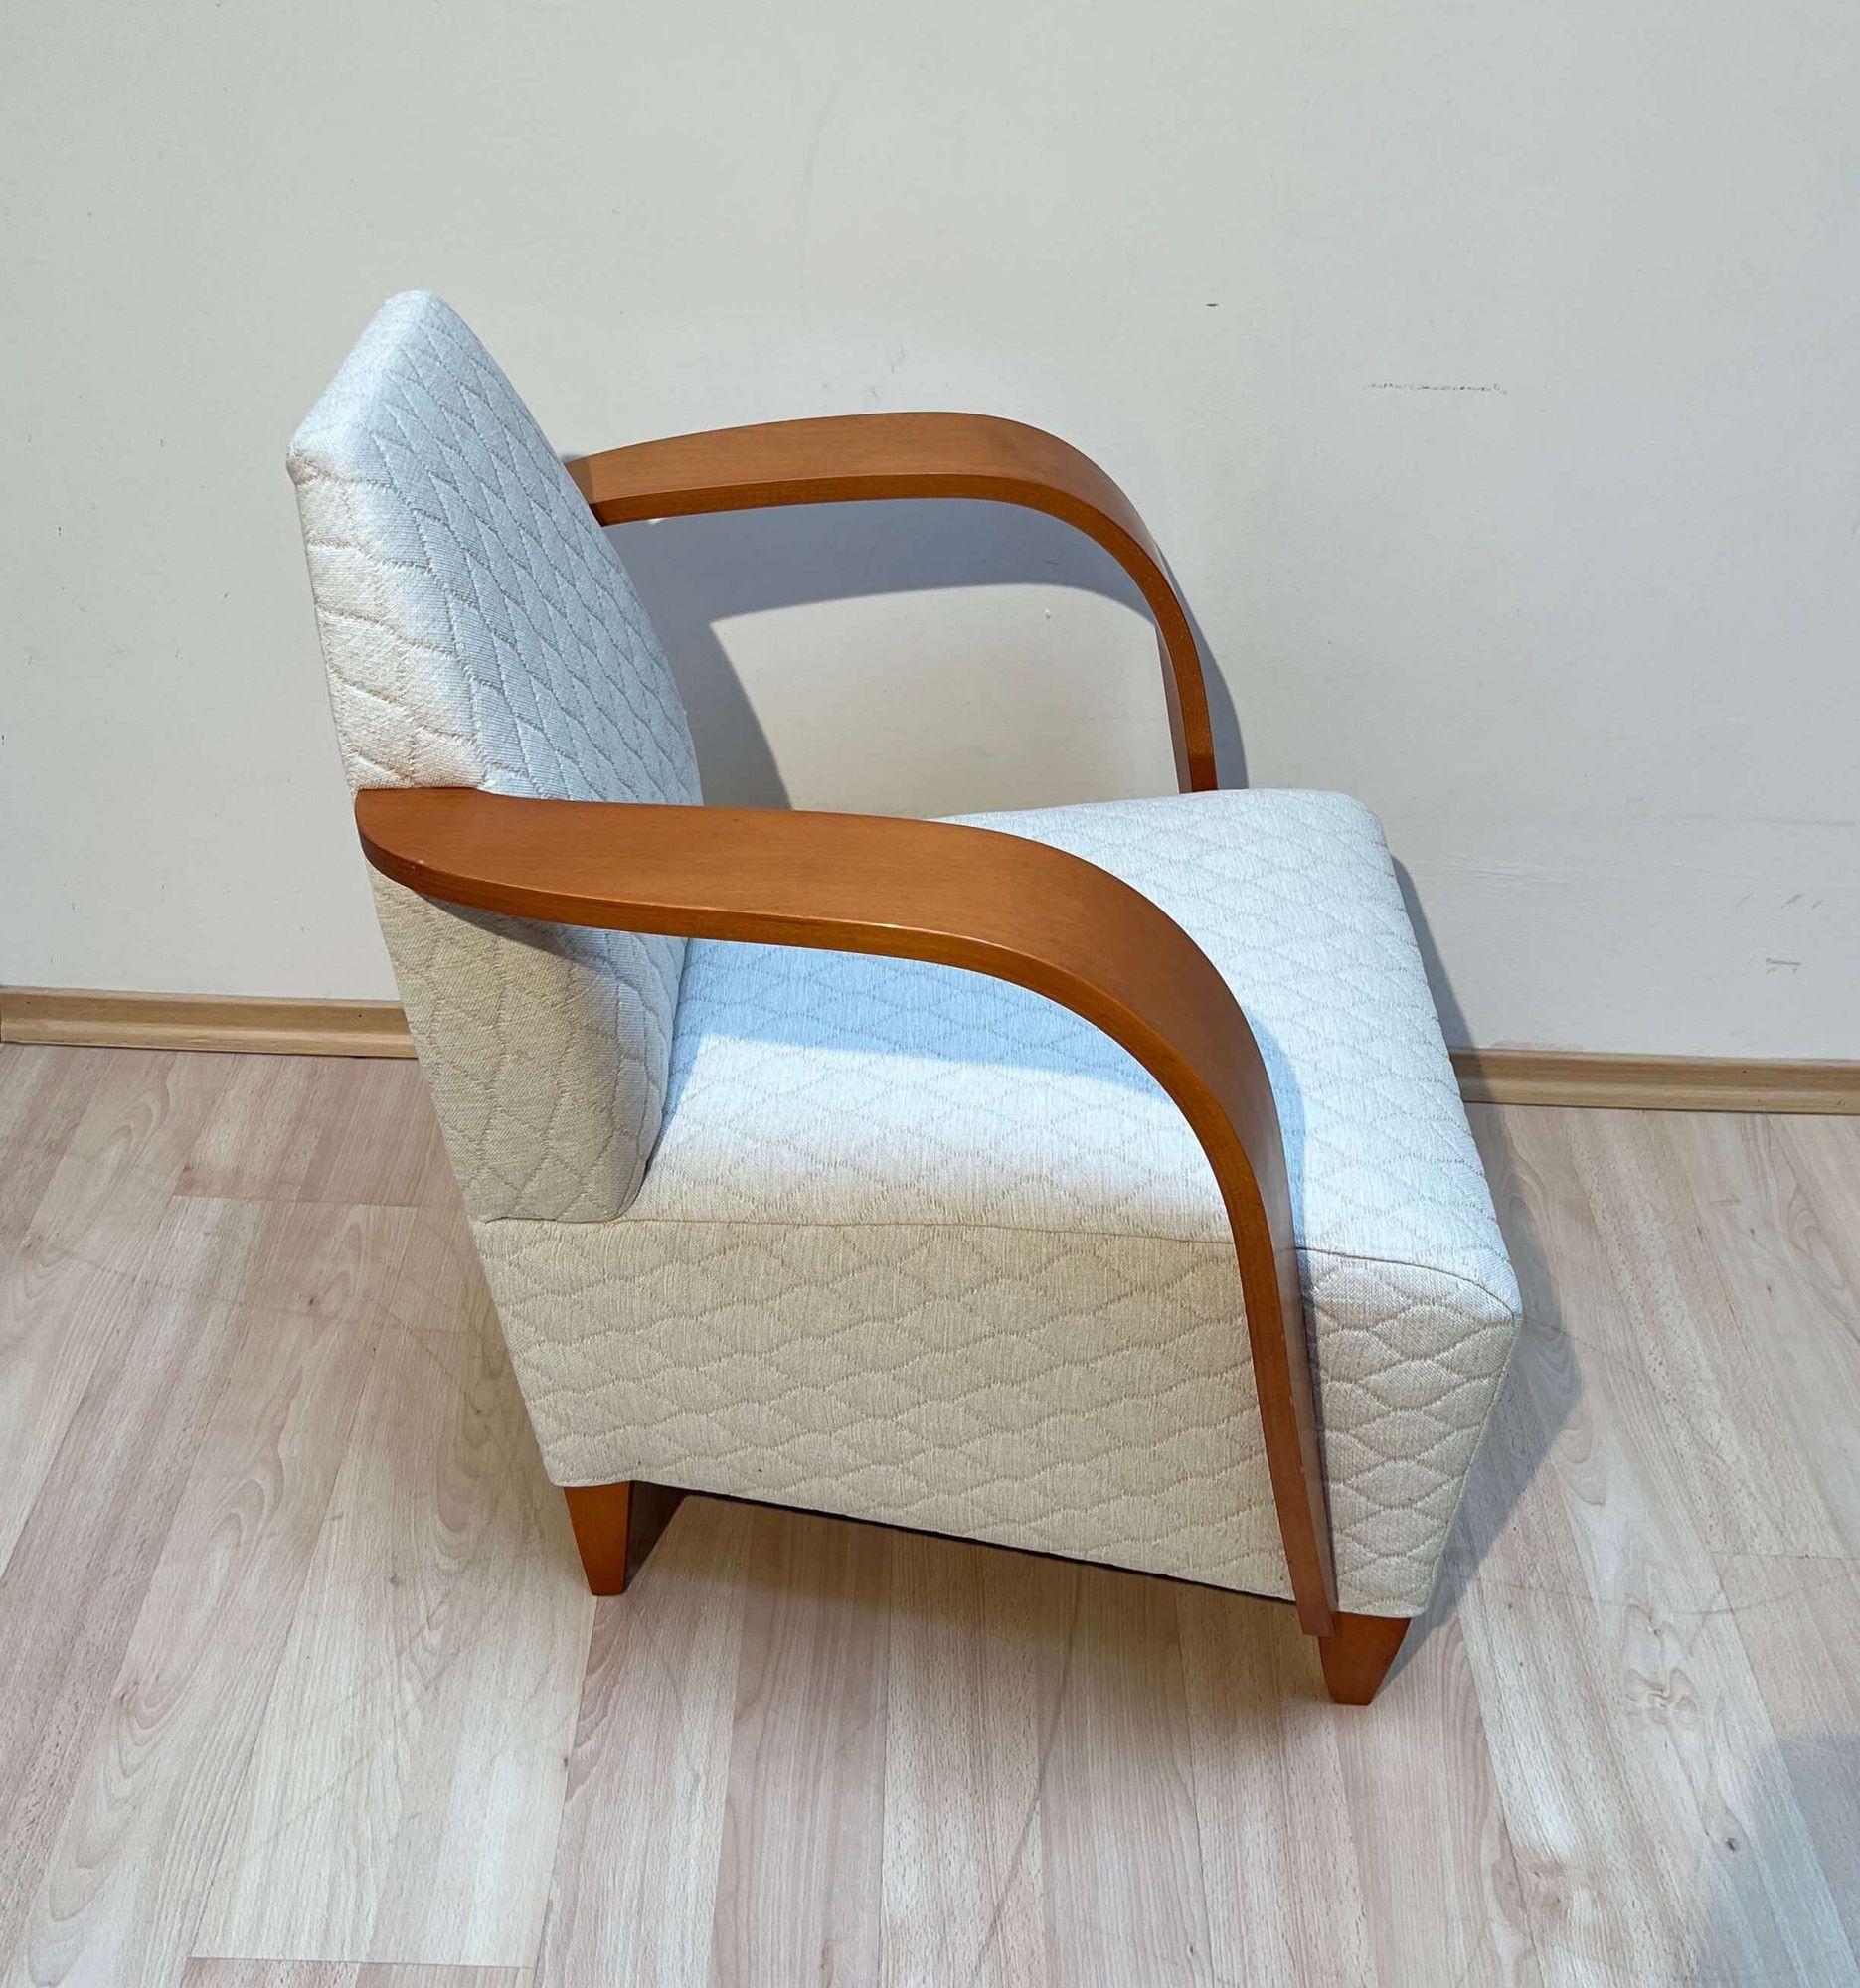 Late 20th Century Design Arm Chair, Beech Wood, Cream-white Quilt Fabric, Spain, 1990s For Sale